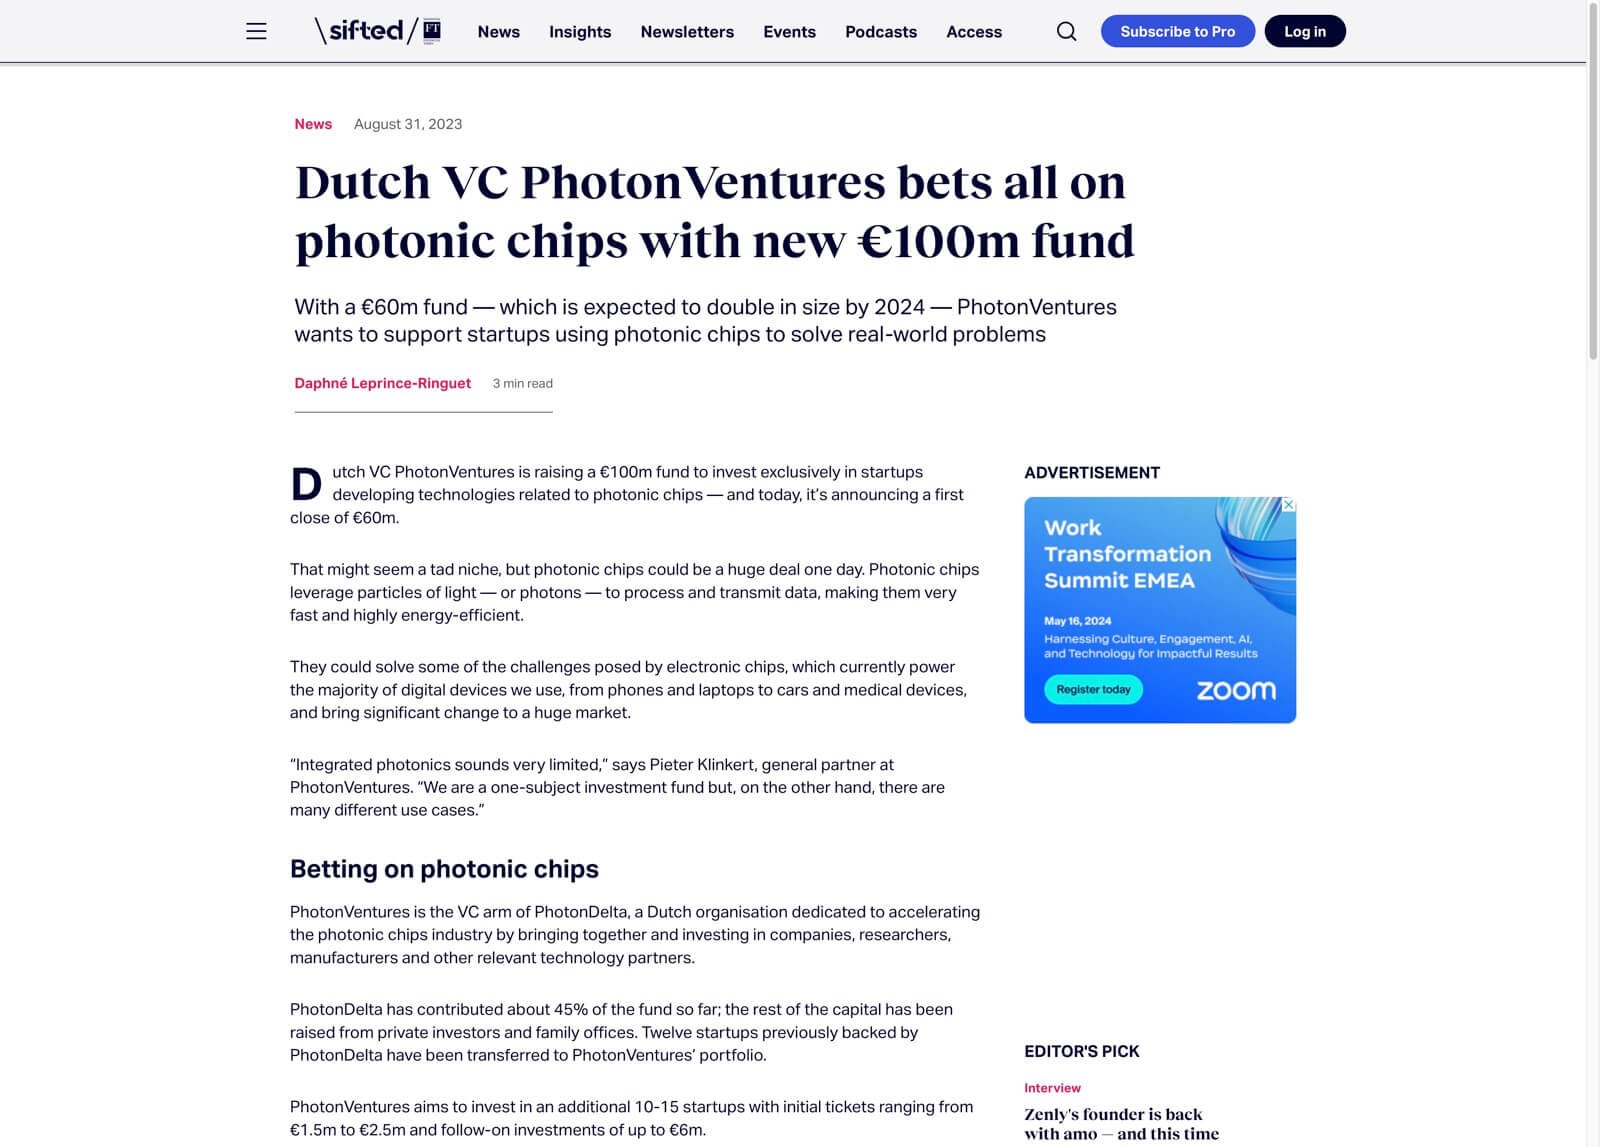 Sifted-Dutch-VC-PhotonVentures-bets-all-on-photonic-chips-with-new-€100m-fund-Sifted.jpg